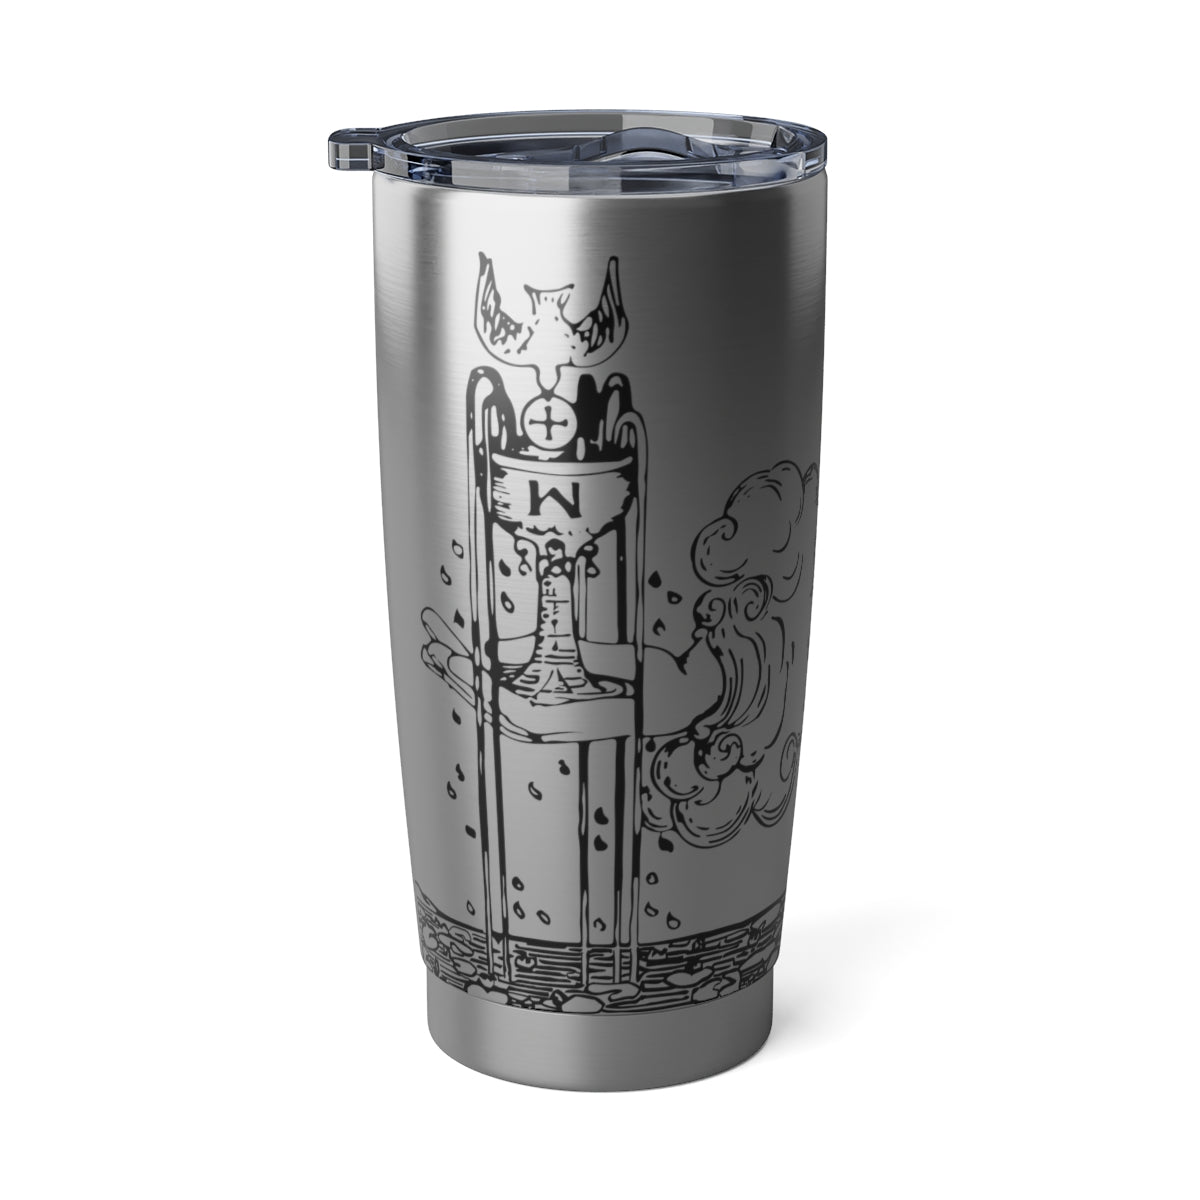 Tarot Tumbler - Ace of Cups - 20oz Stainless Steel Tumbler